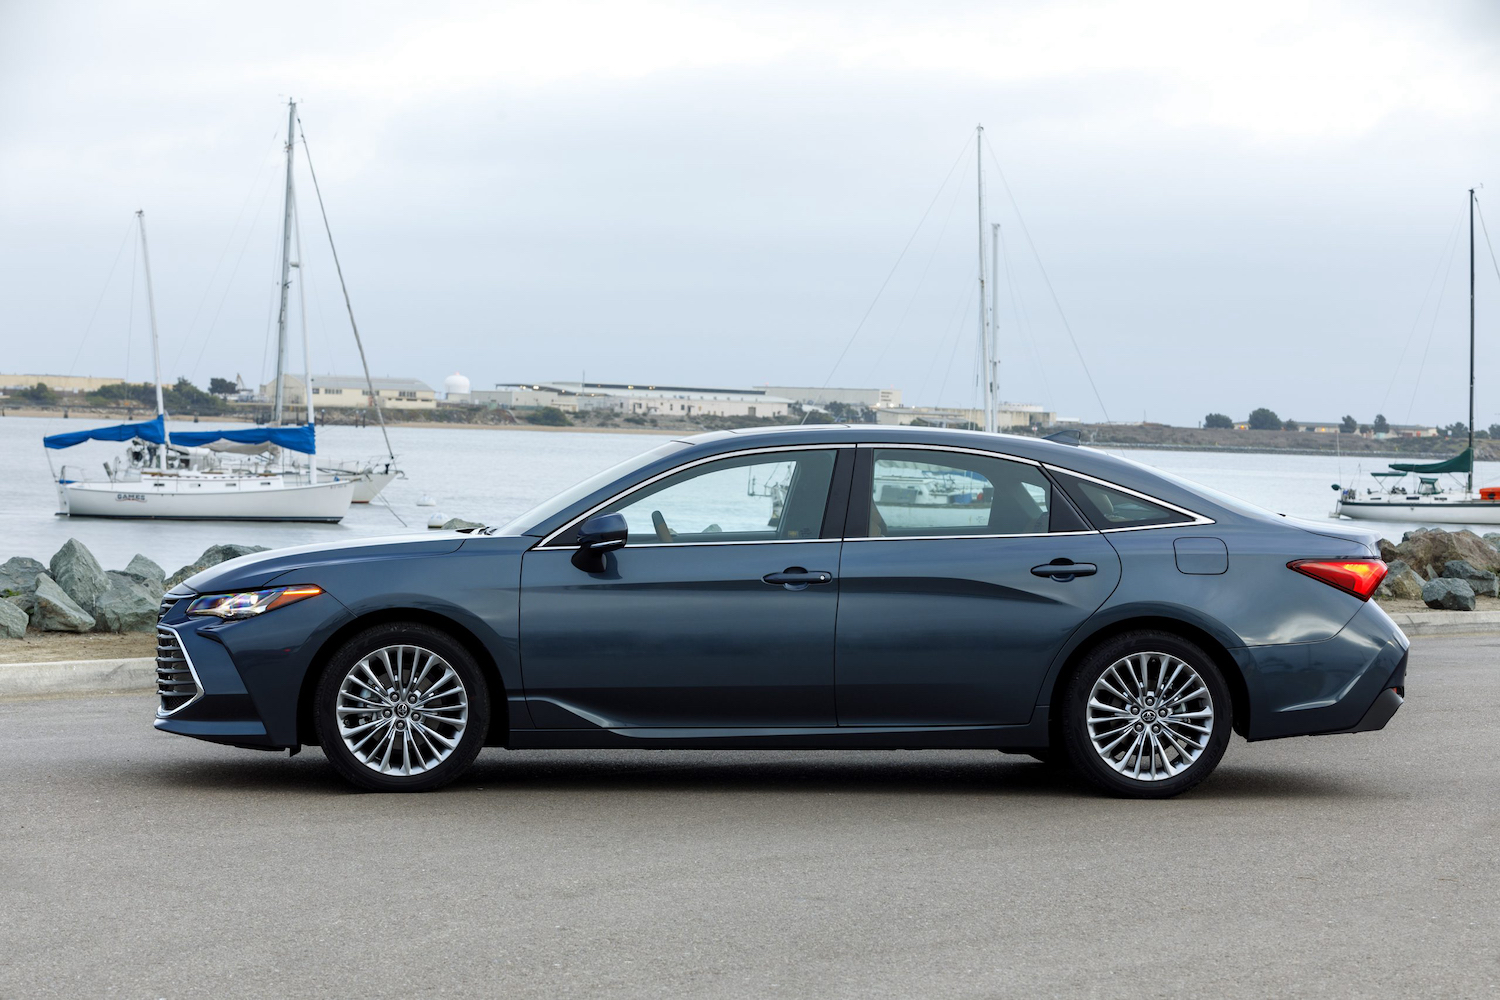 A 2022 Toyota Avalon Hybrid parked, the 2022 Toyota Avalon Hybrid is one of the best hybrid cars for families